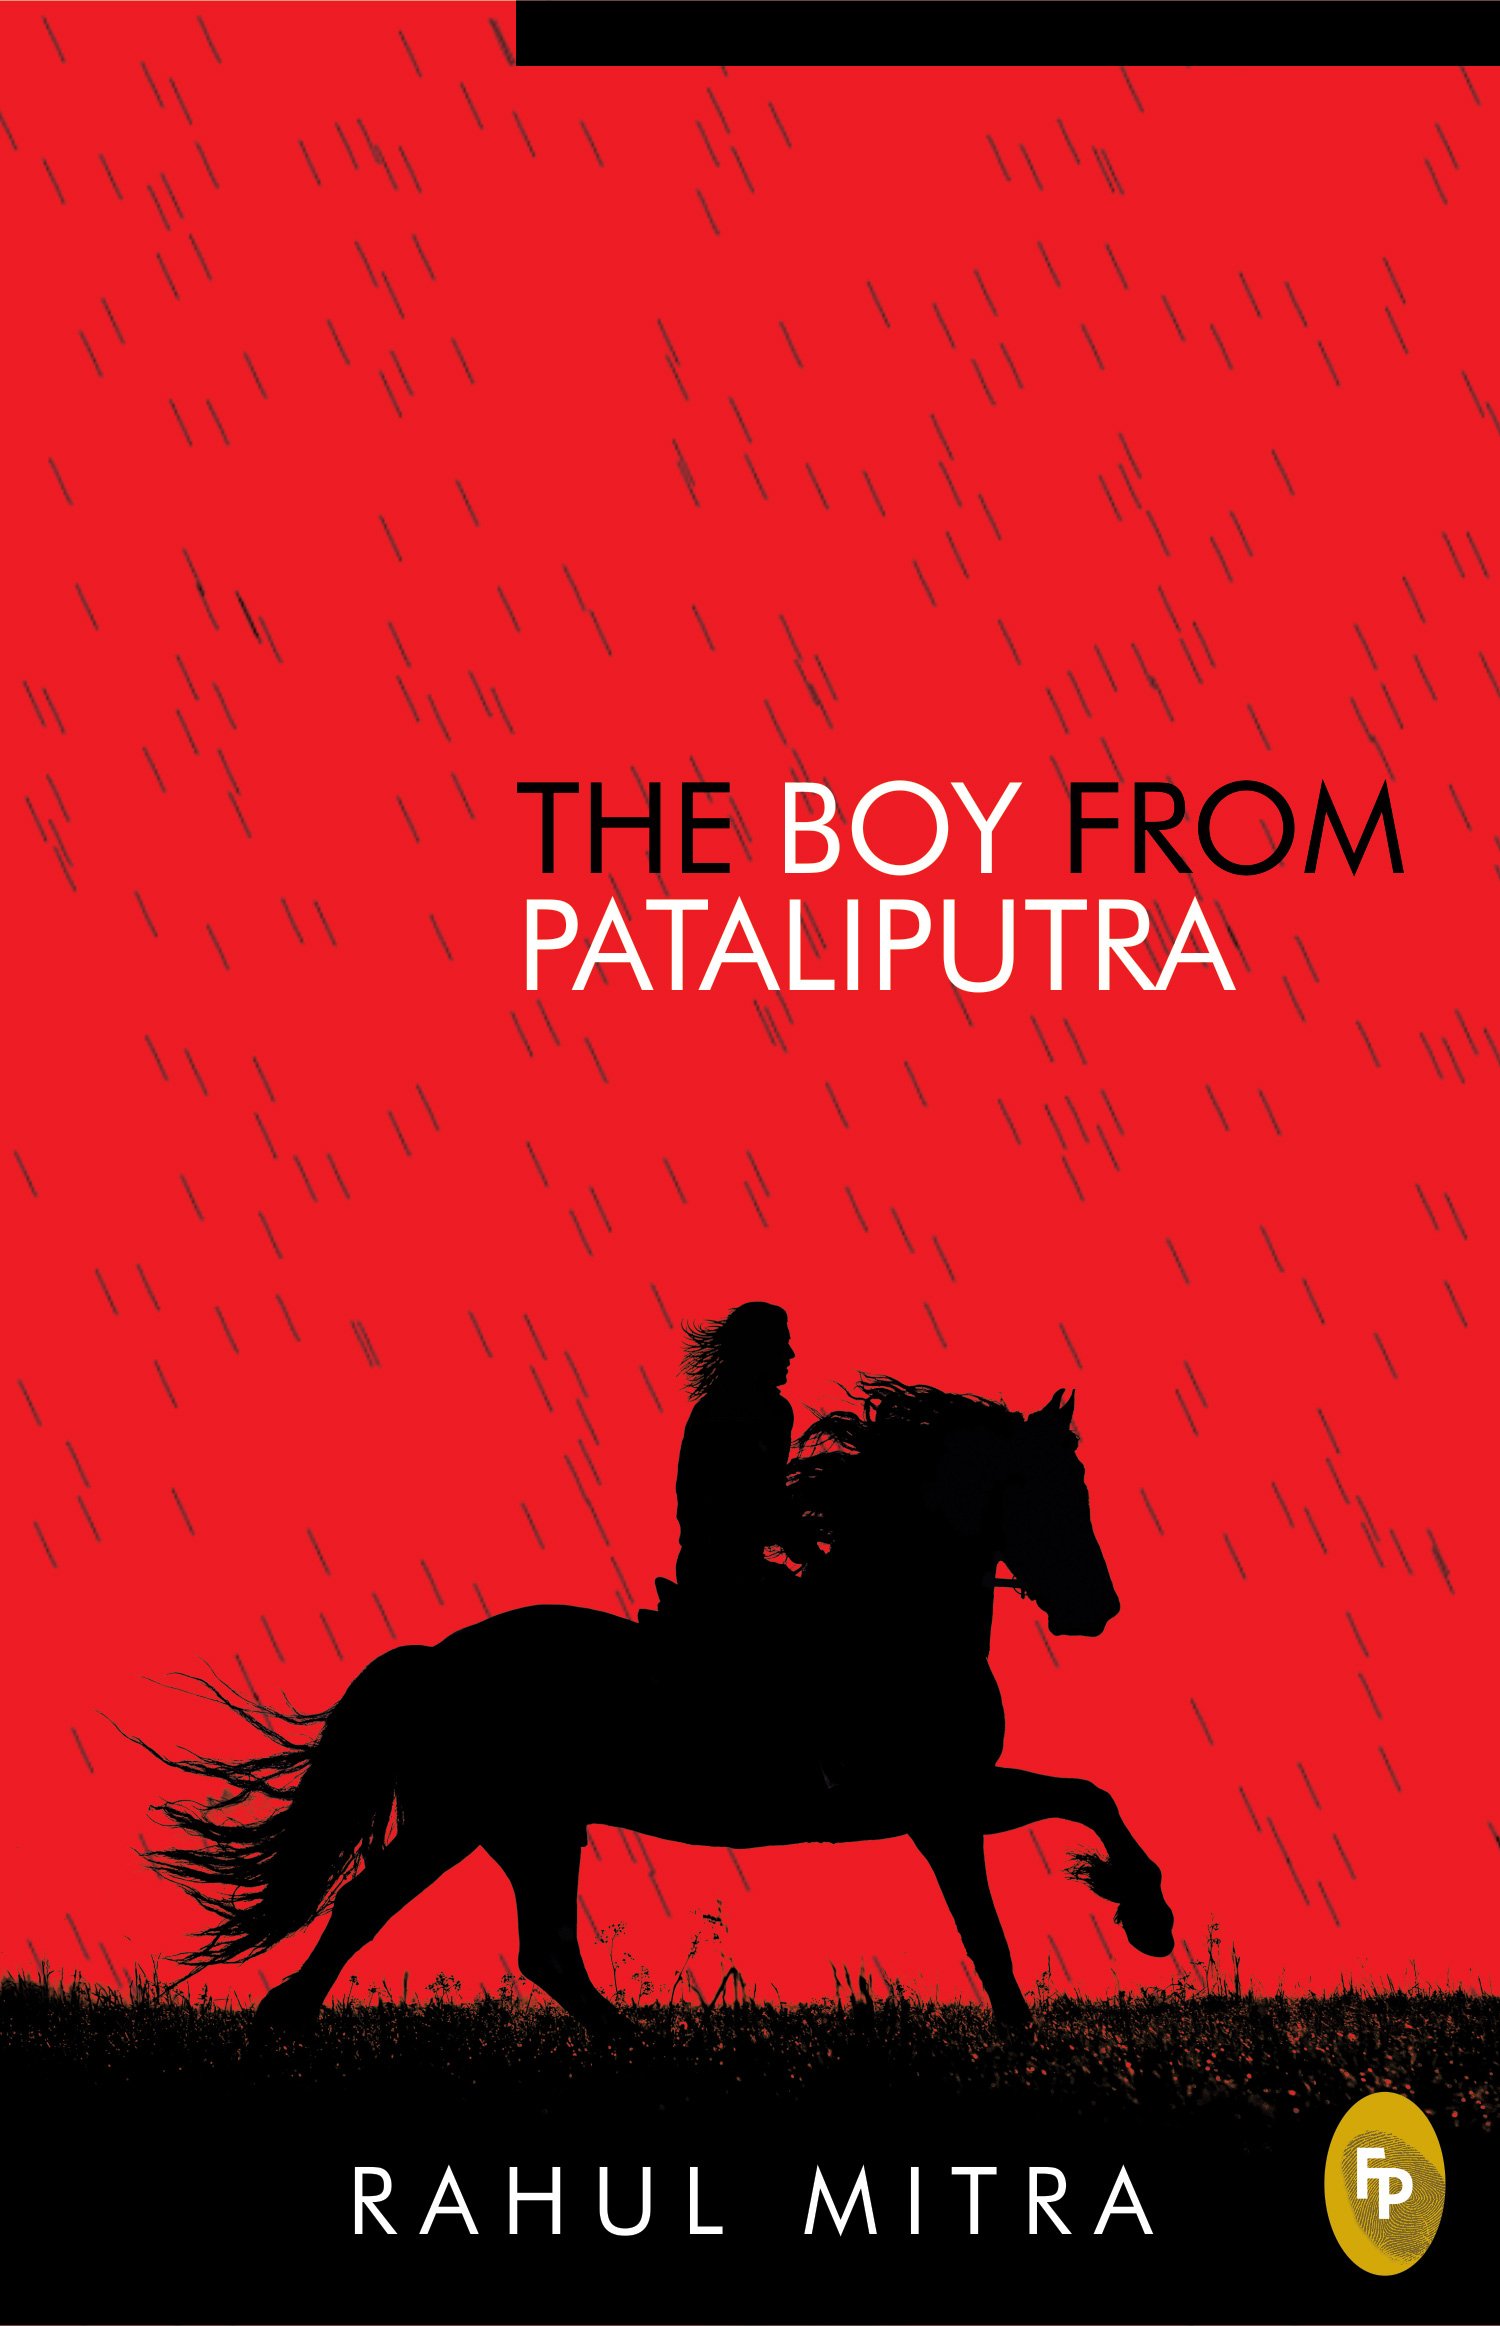 The Boy from Pataliputra by Rahul Mitra